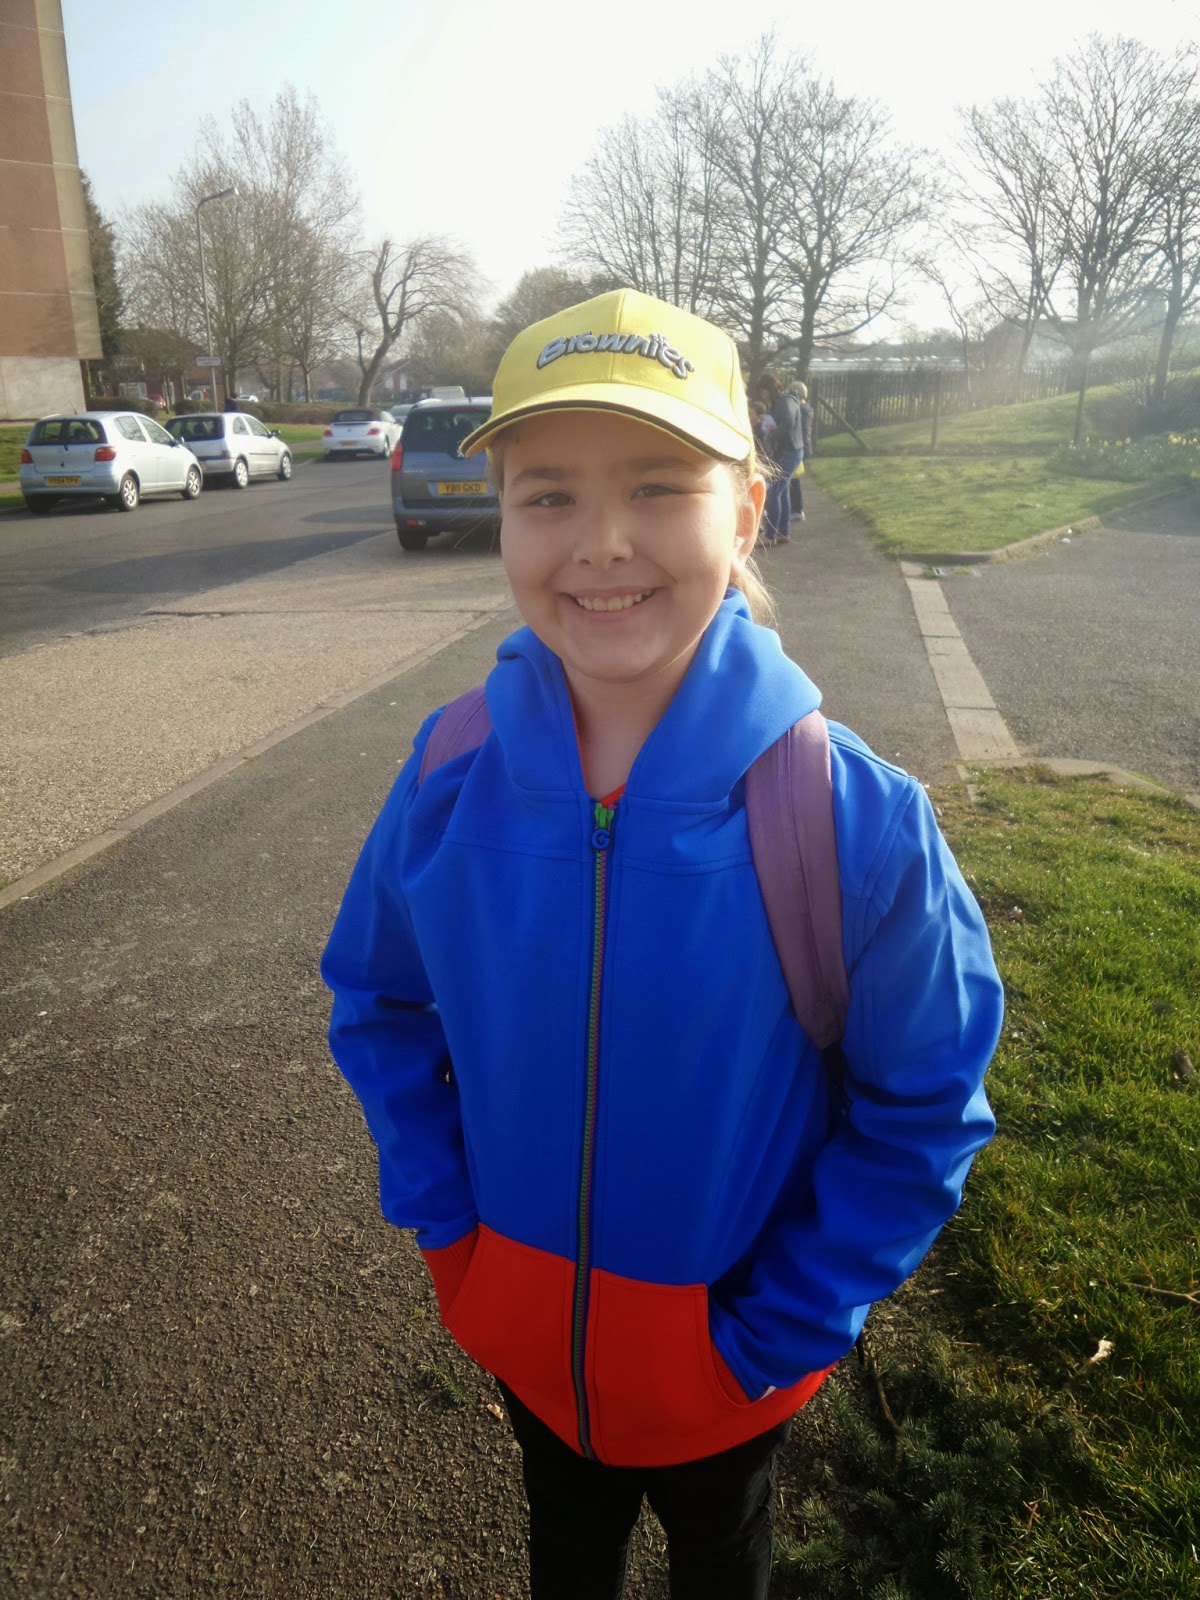 Top Ender in her Guides gear about to go on a Guides Trip